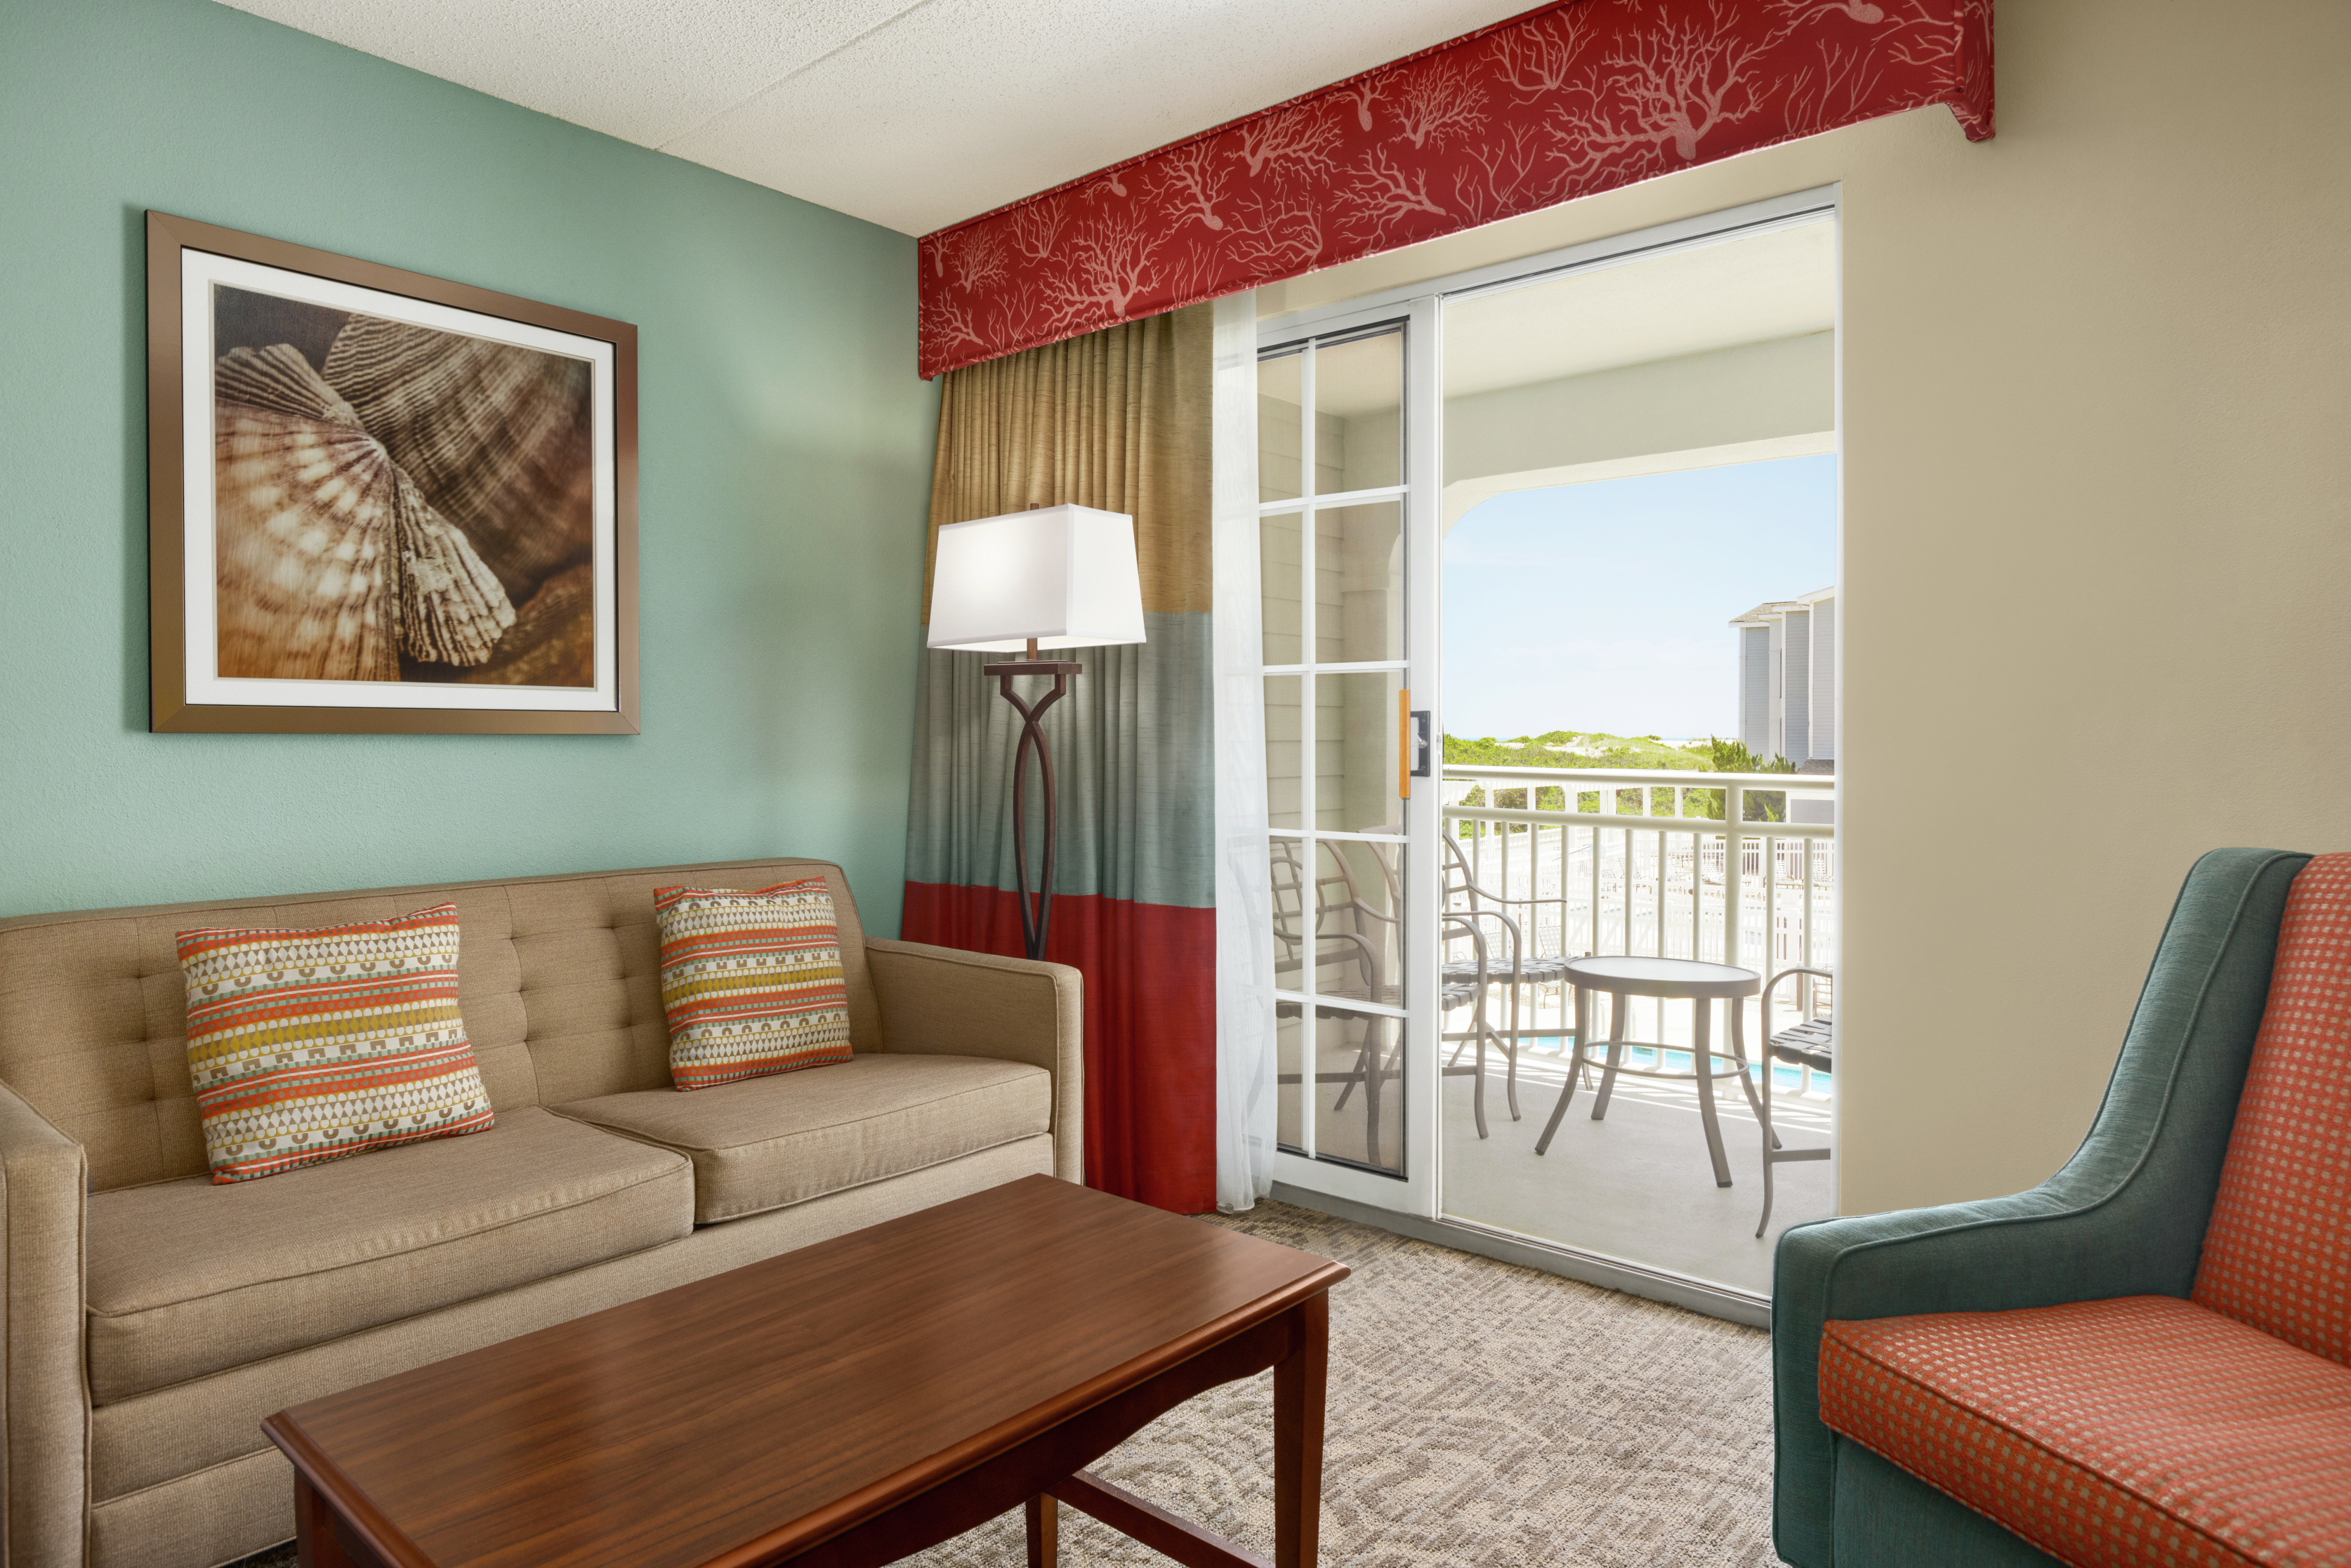 Spacious lounge area in guestroom with walkout to private balcony.